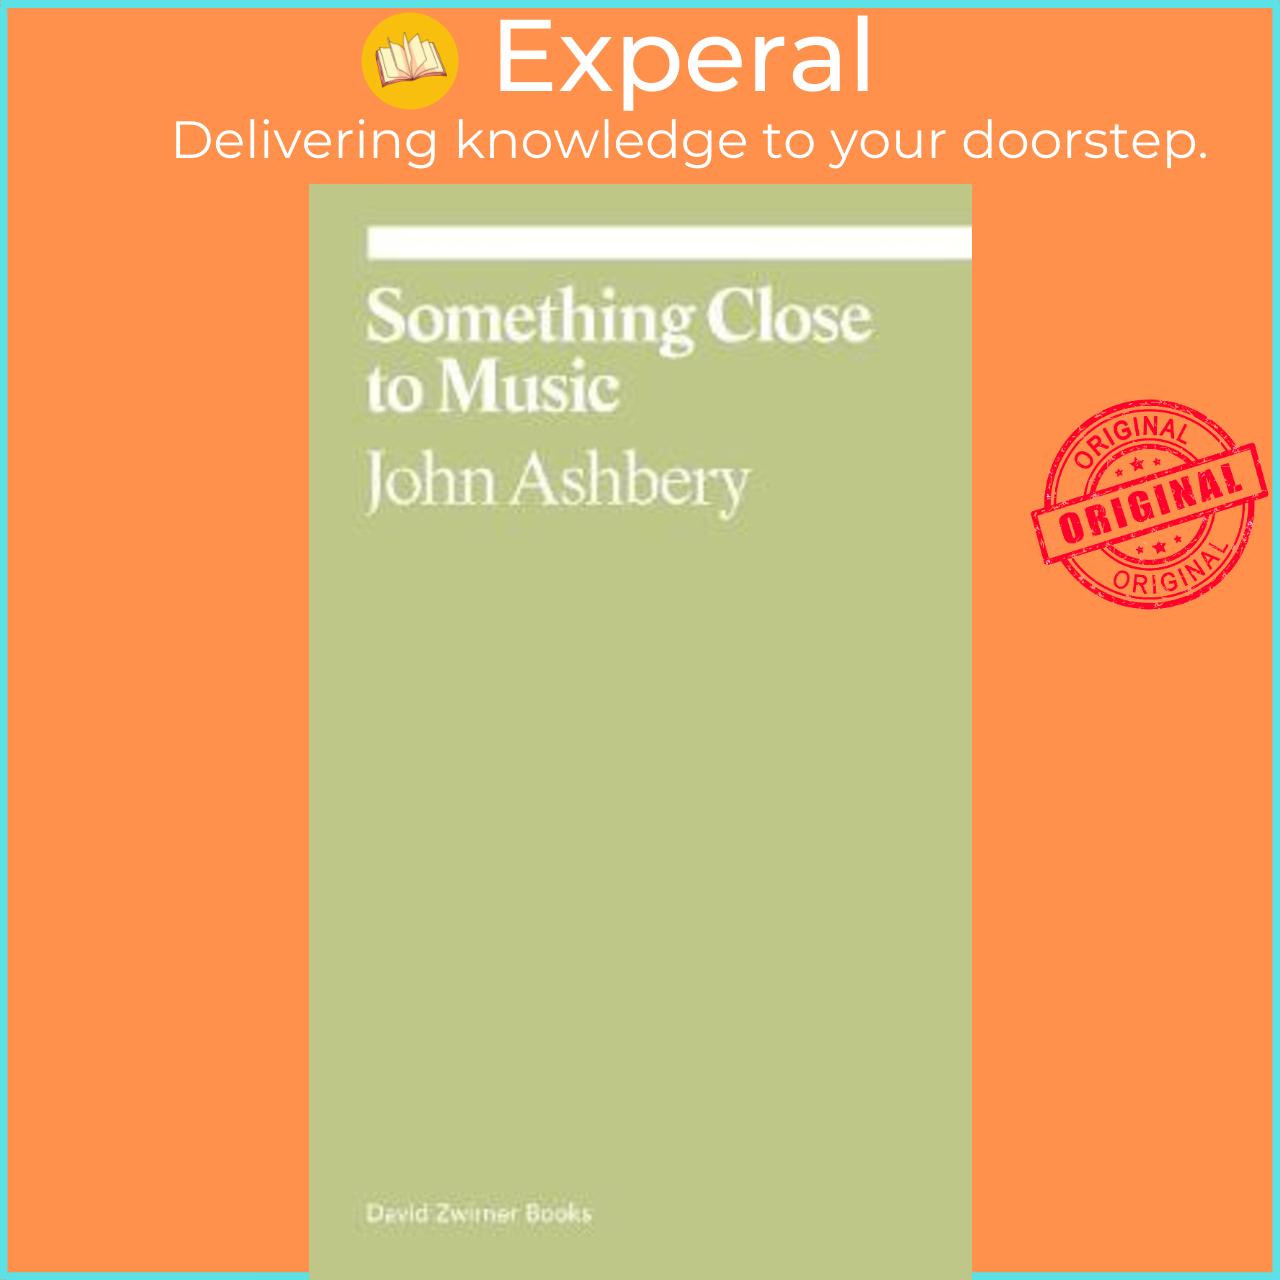 Sách - Something Close to Music by John Ashbery (US edition, paperback)